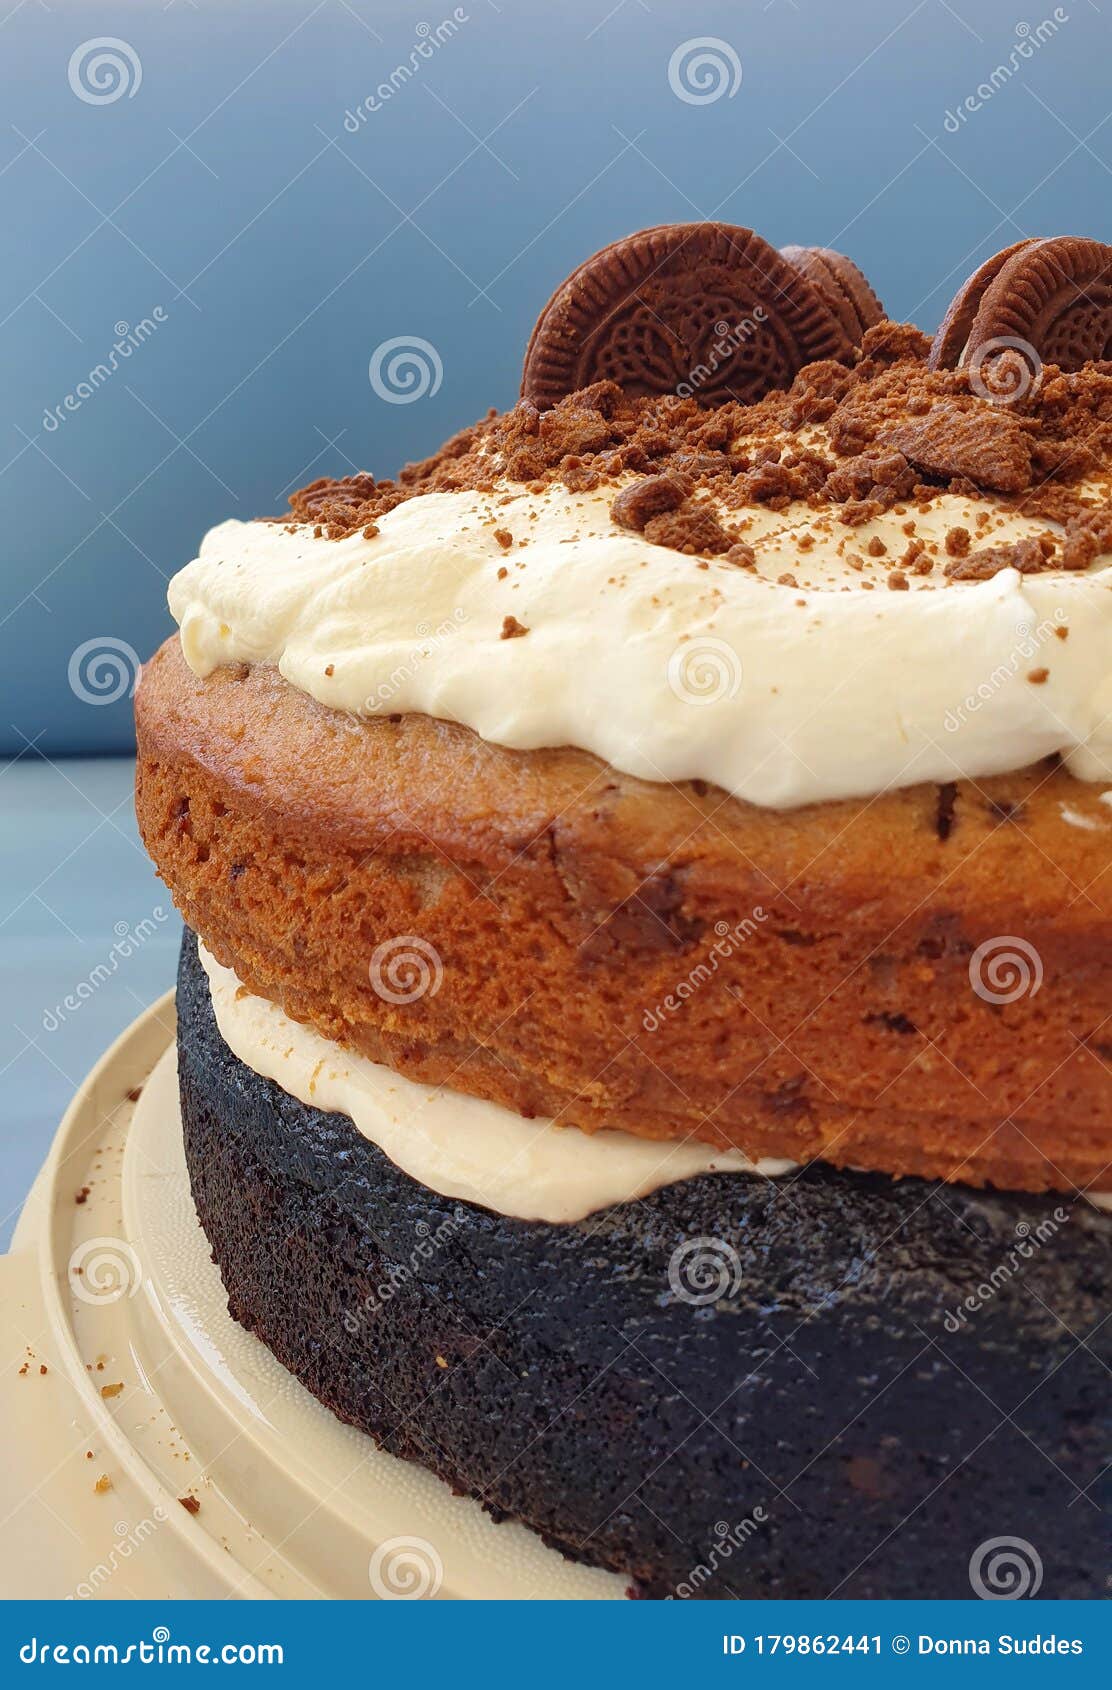 Chocolate and Cappuccino Cake with Cream Frosting Stock Image - Image ...